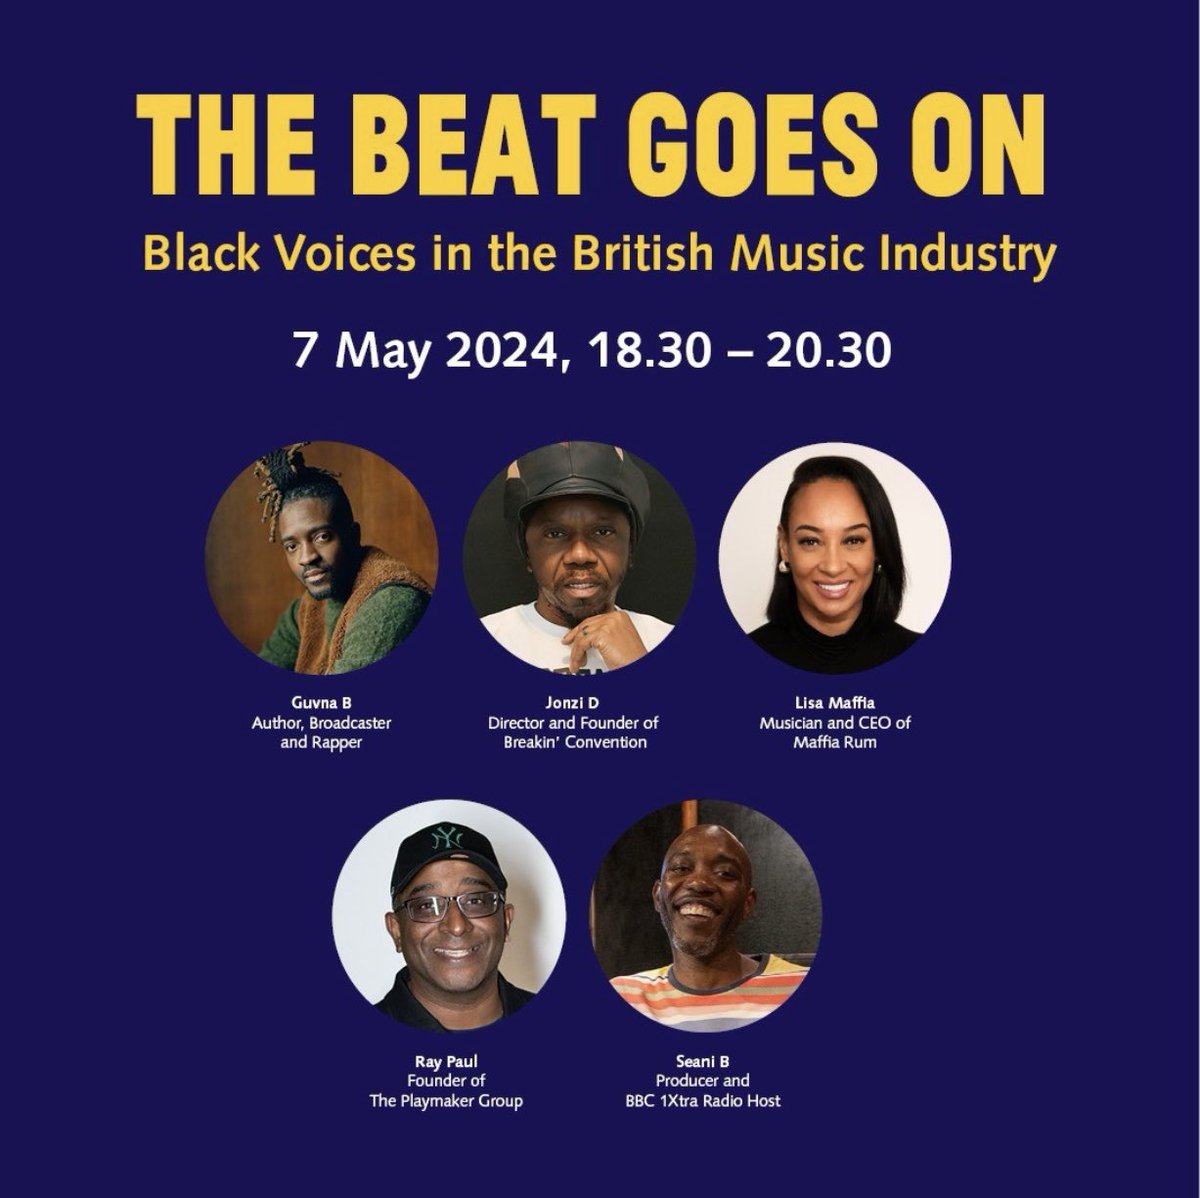 I will be speaking at the British Library tonight about my research on the economic impact of Grime music on the British music industry, delving into its influence on culture and commerce.' Event link: eventbrite.com/e/the-beat-goe…